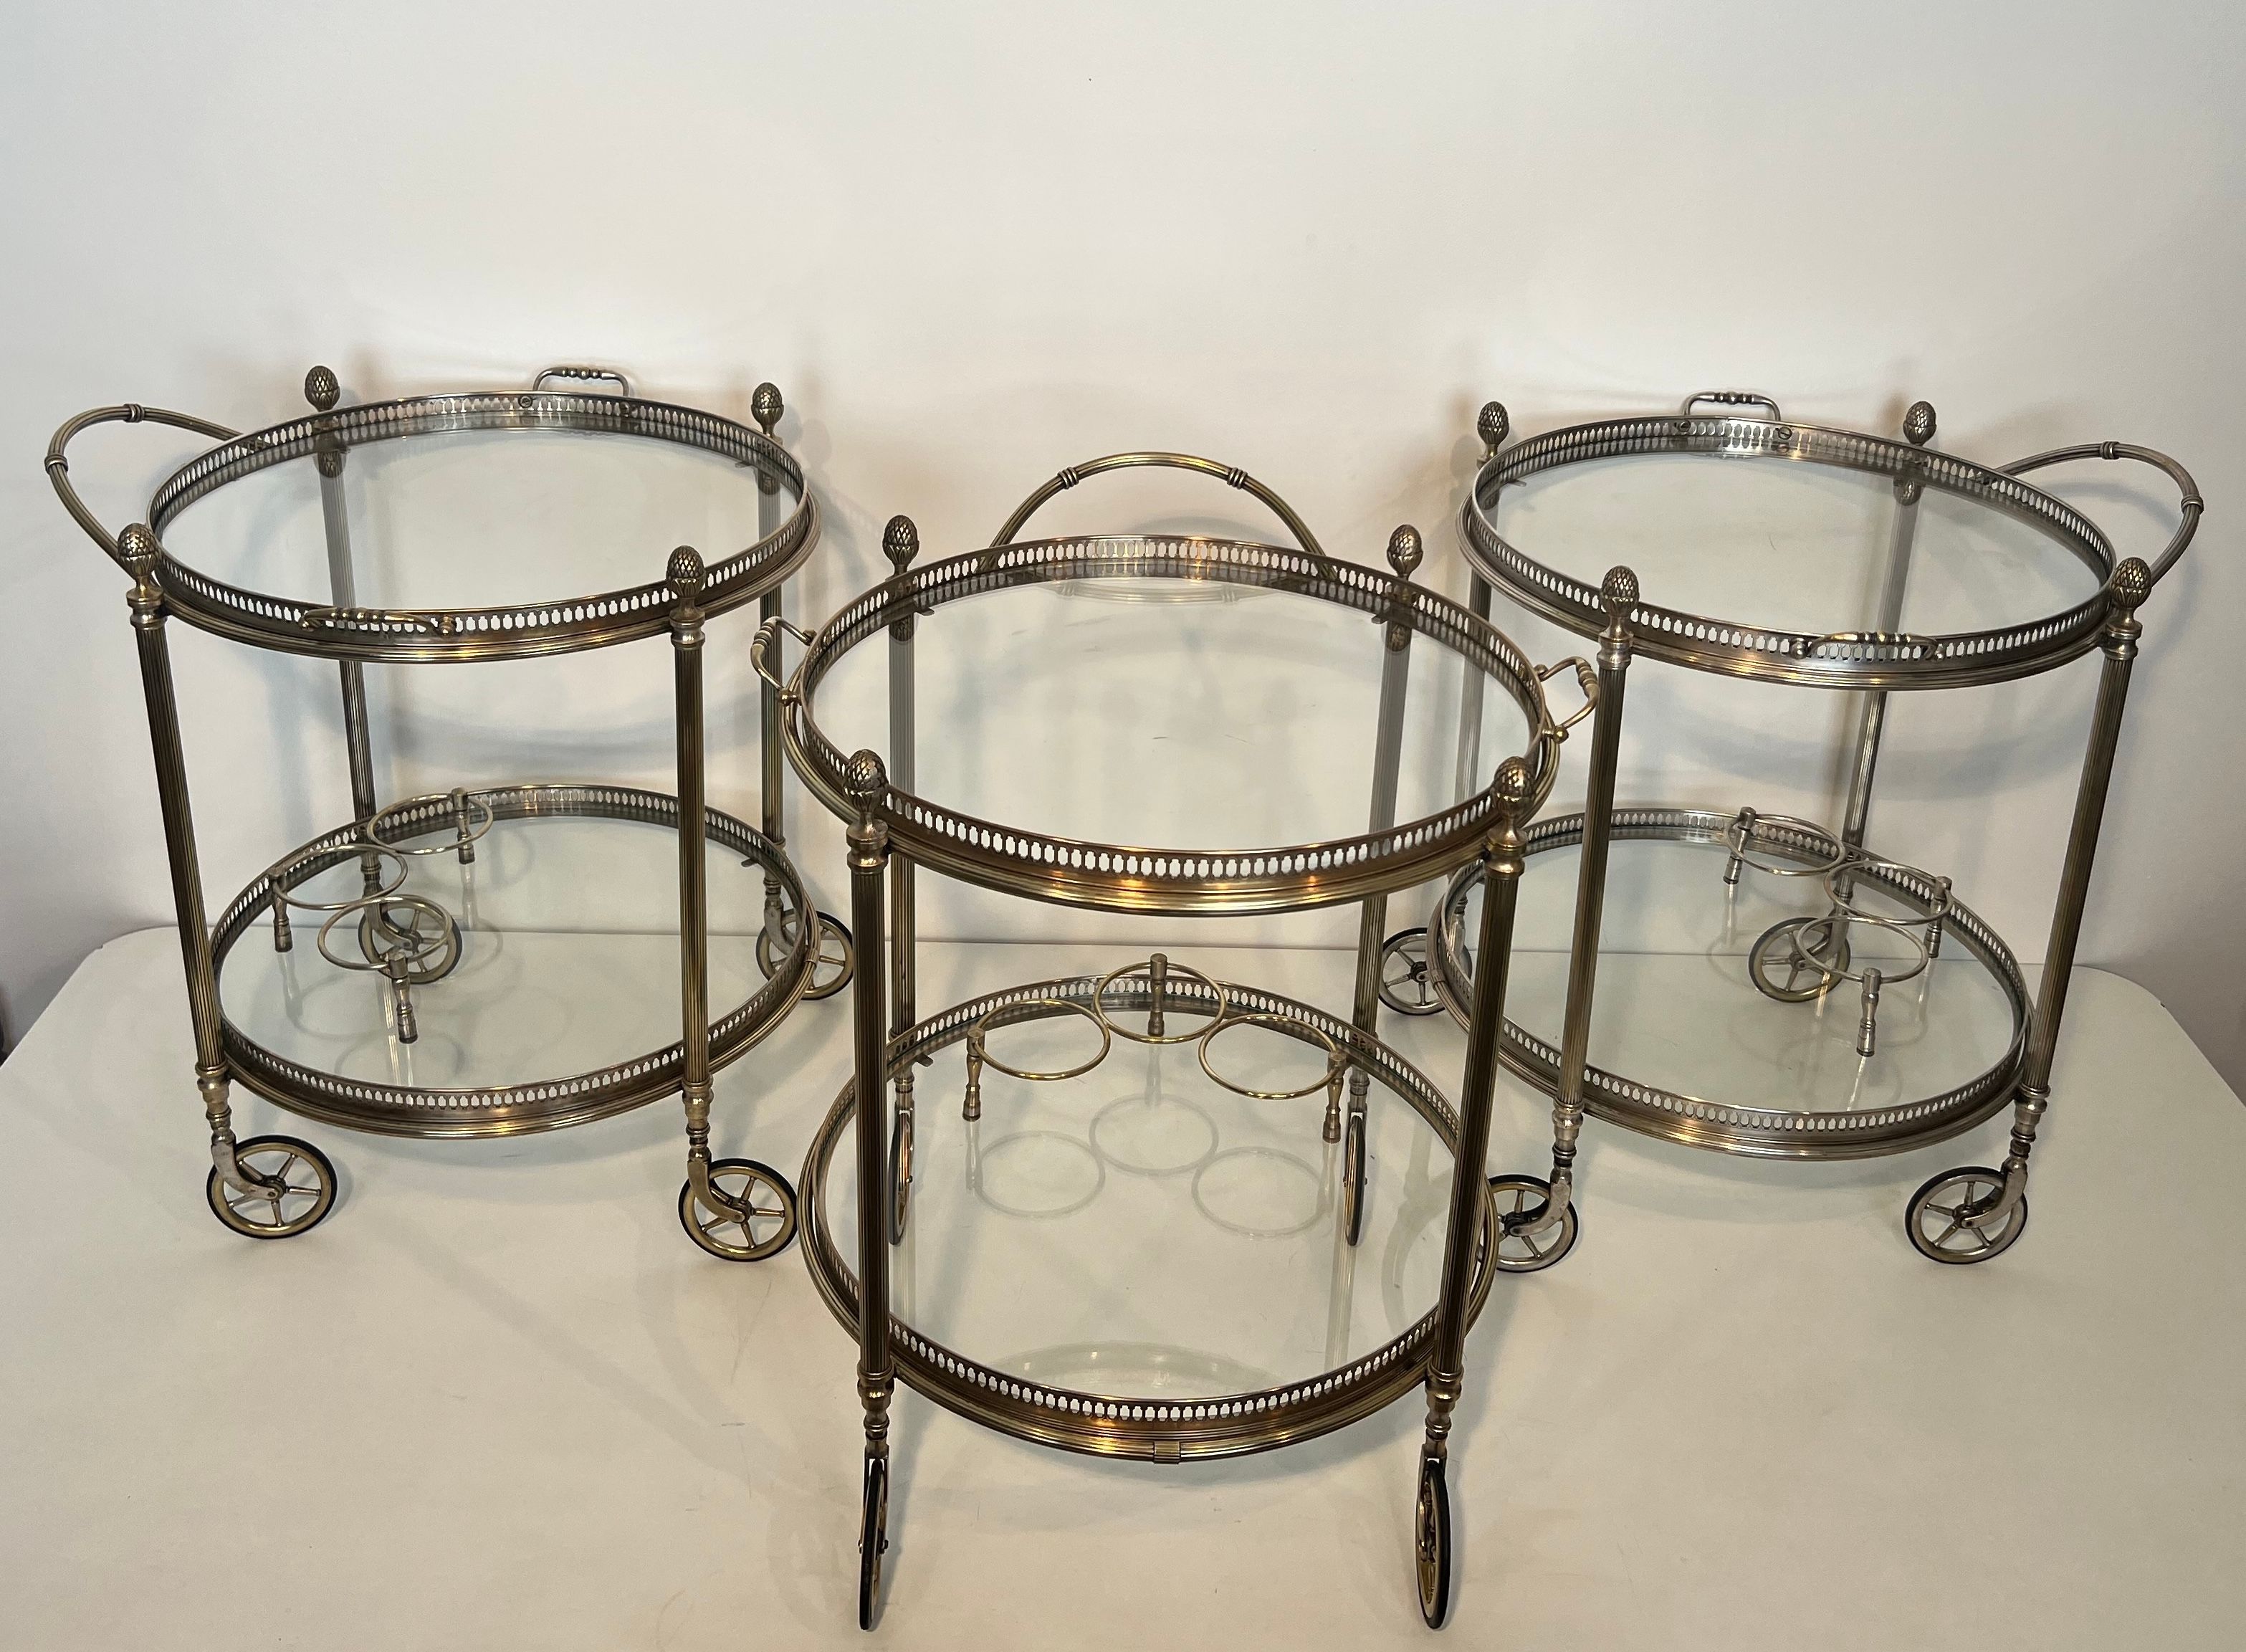 Rare Set of 3 Round Silvered Brass Drinks Trolley by Maison Bagués